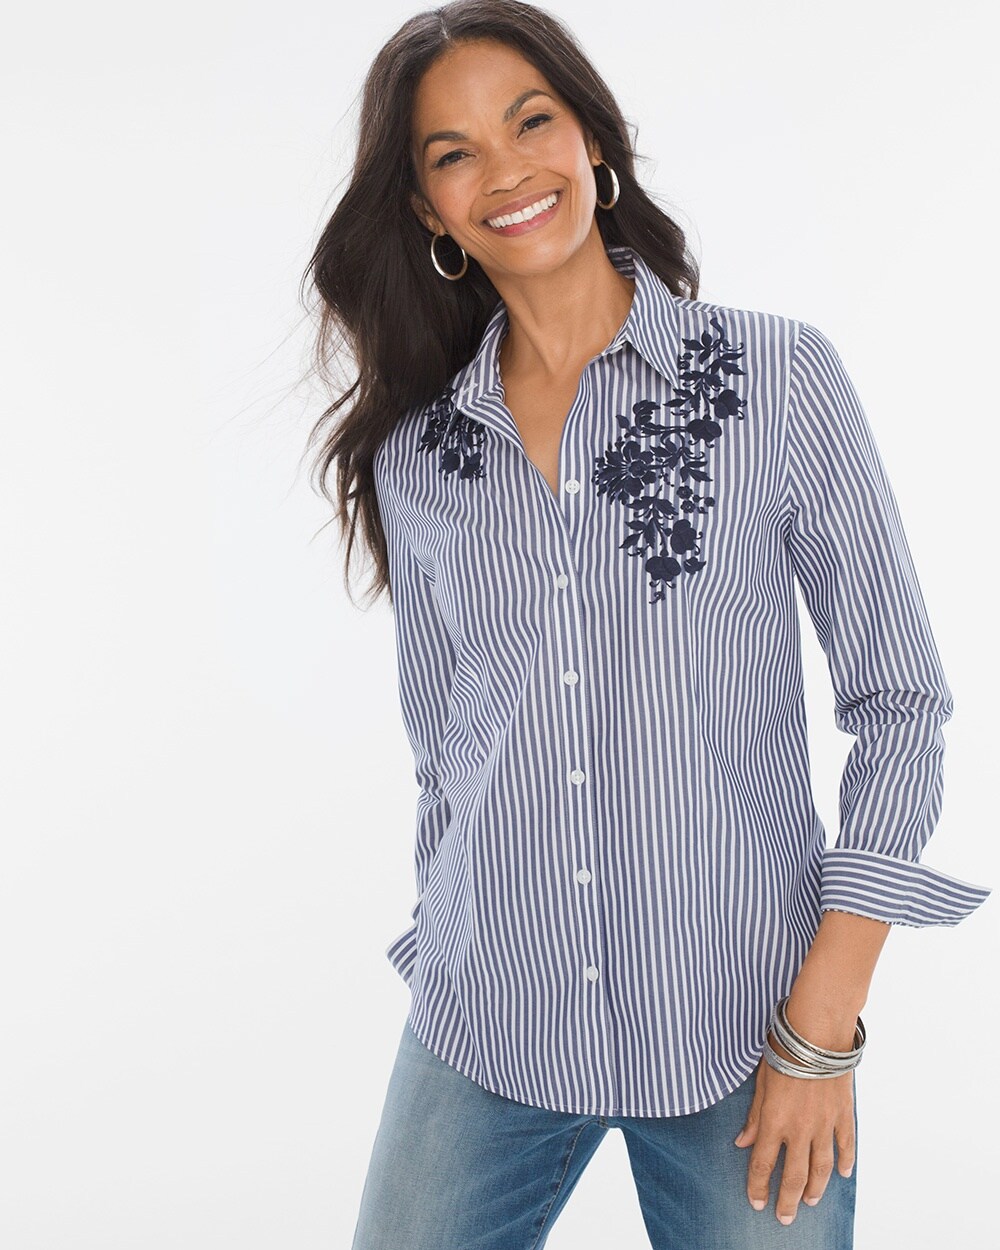 No-Iron Striped Embroidered Shirt